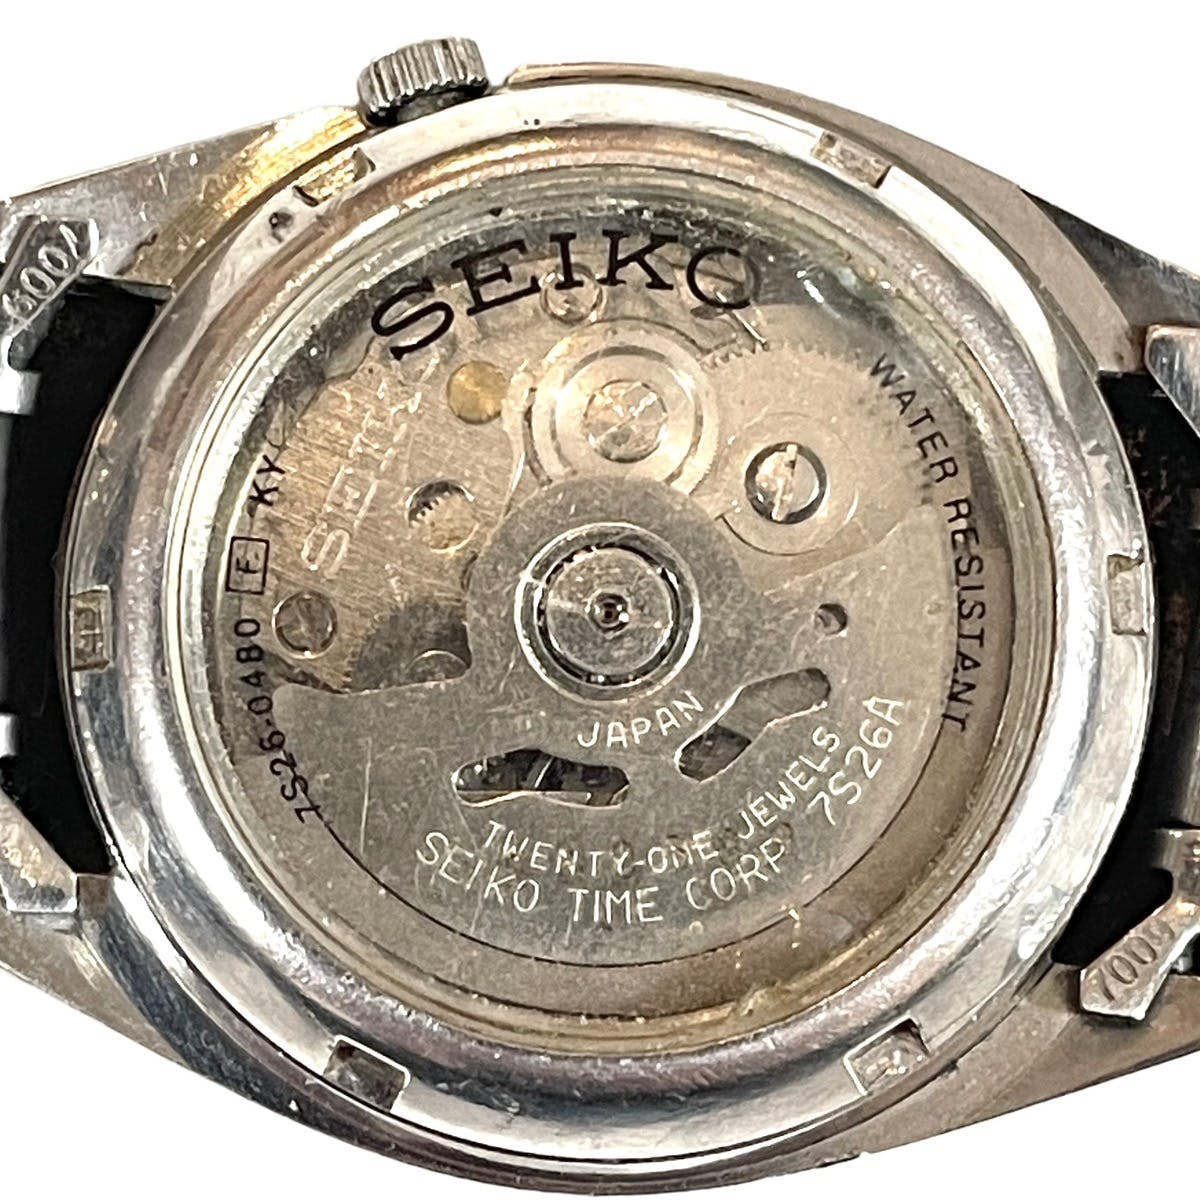 Seiko - Stainless Day-Date Automatic Watch - 8